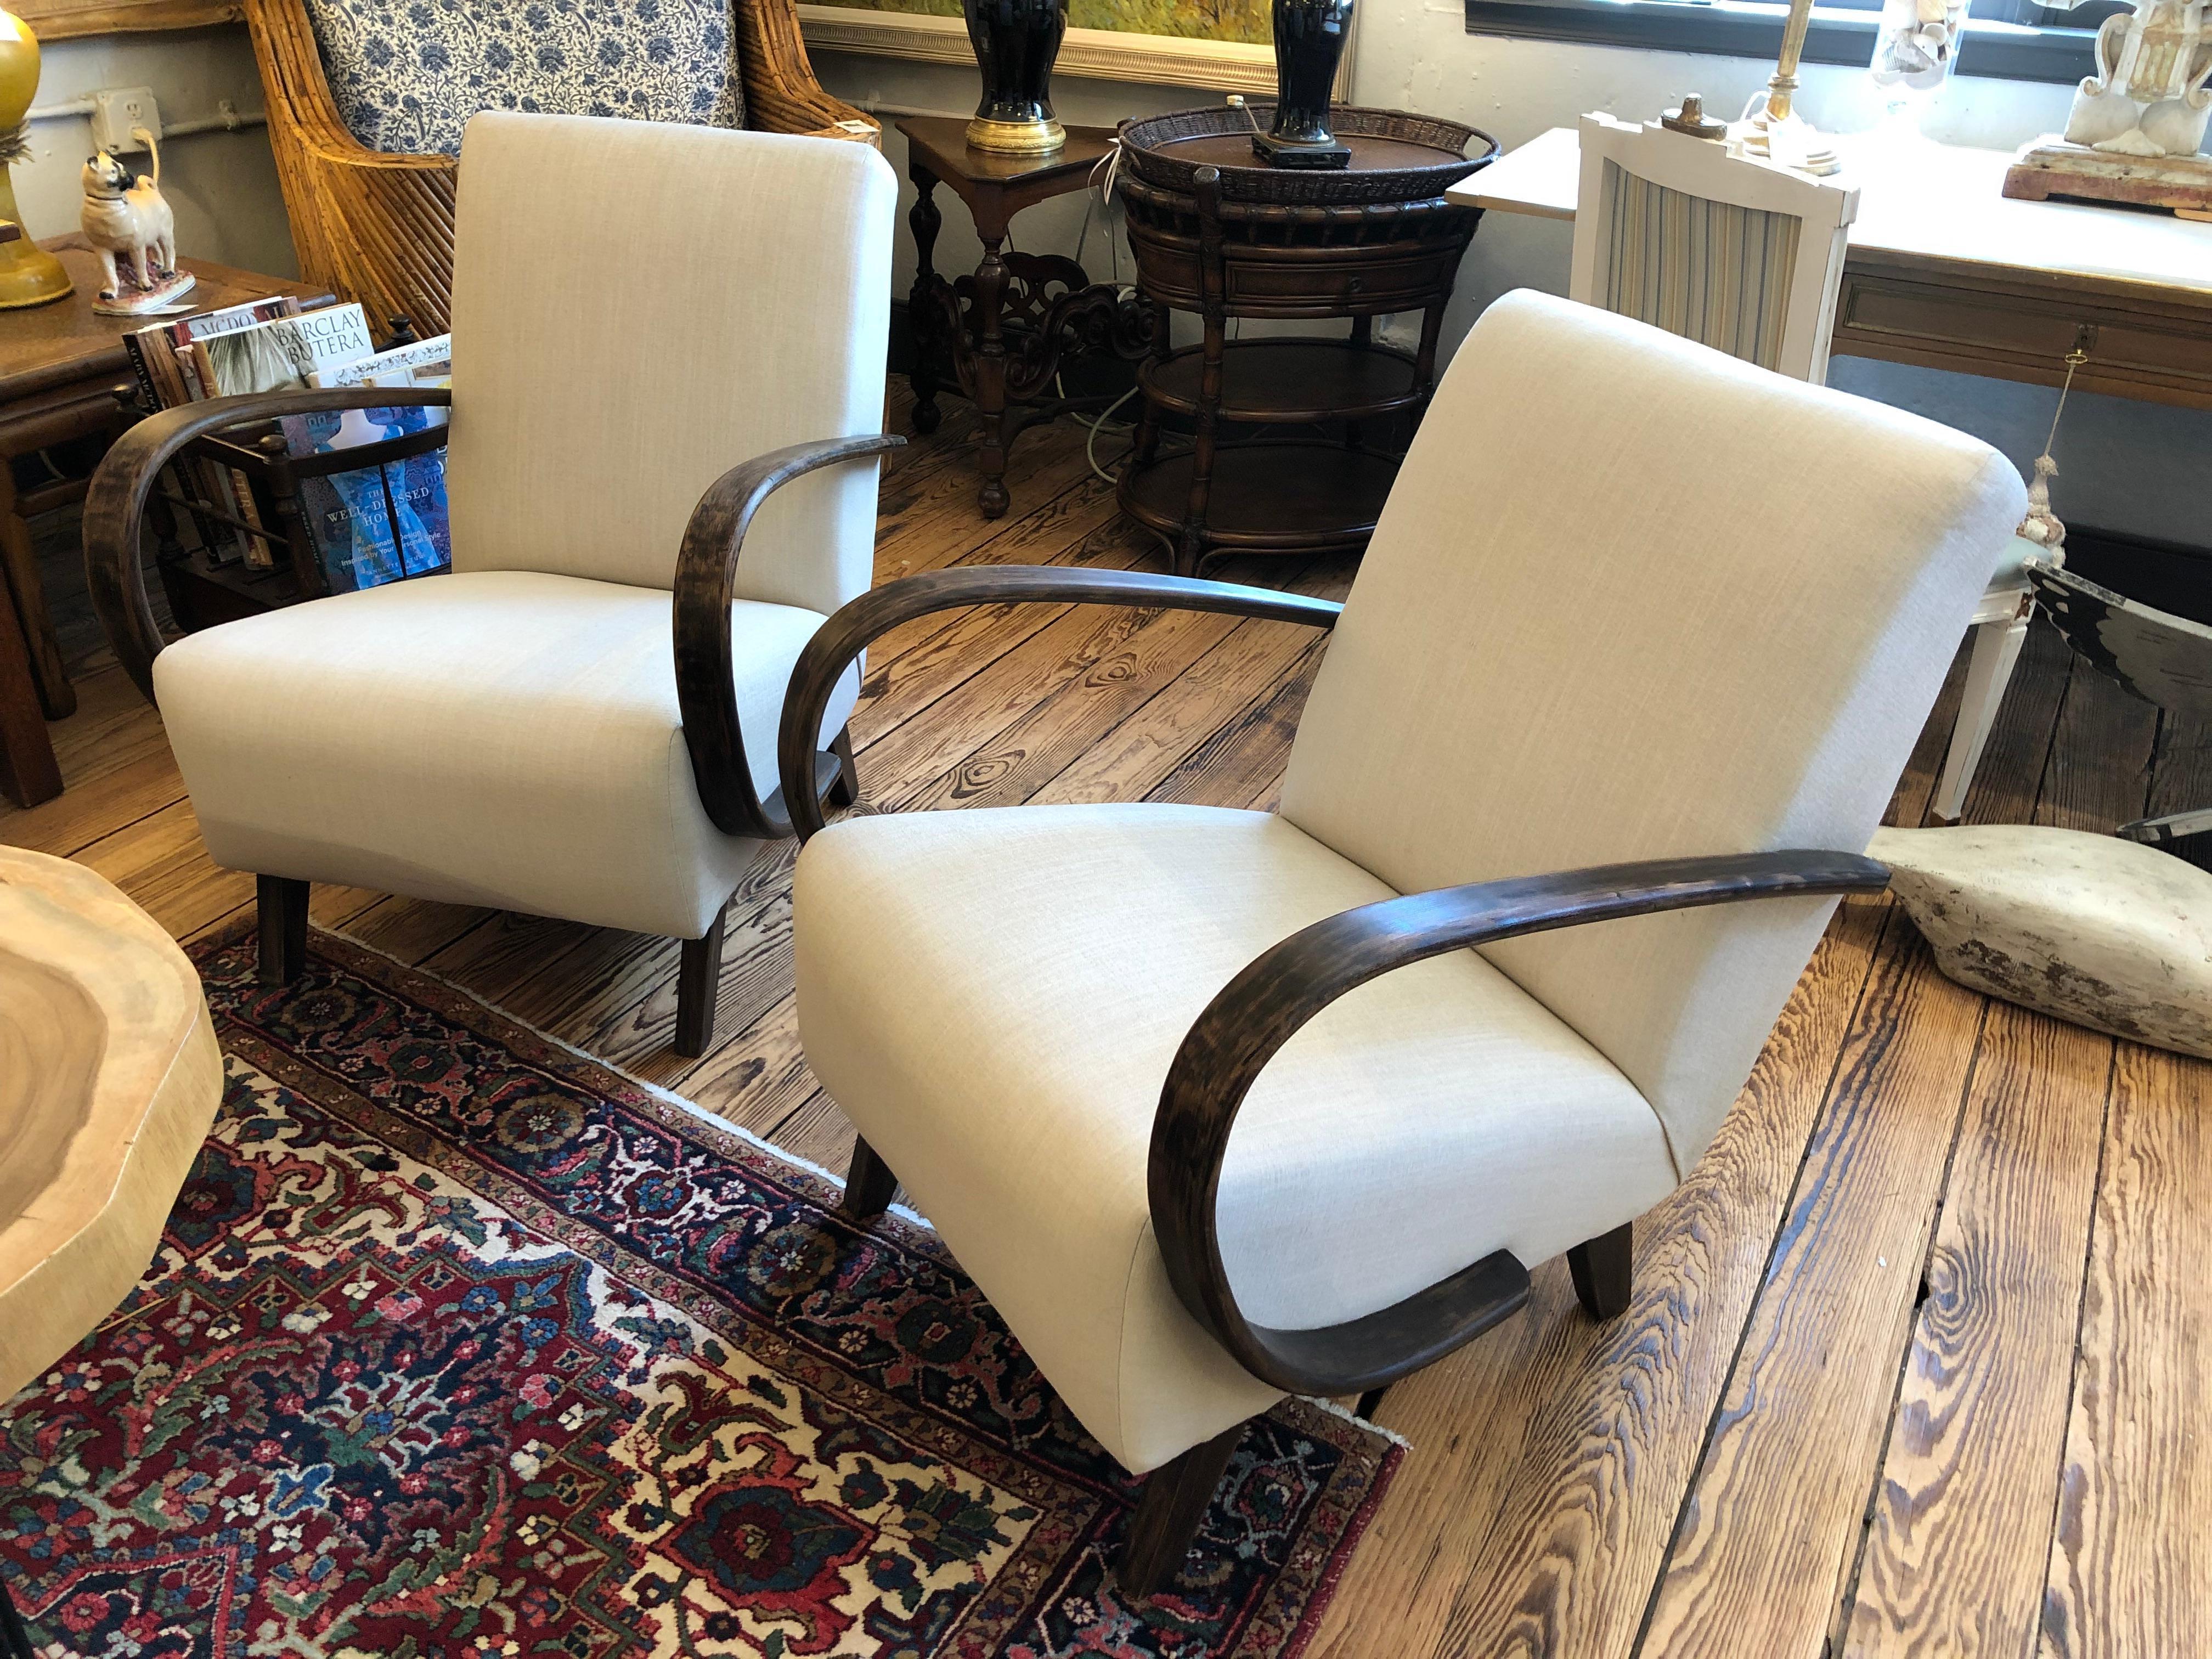 Superb comfortable sophisticated pair of vintage club chairs by Czech designer Jindrich Halabala having a deep upholstered linen seat resting on angled ebonized feet framed by dramatically curved bentwood arms. A blend of Art Deco and Modern make